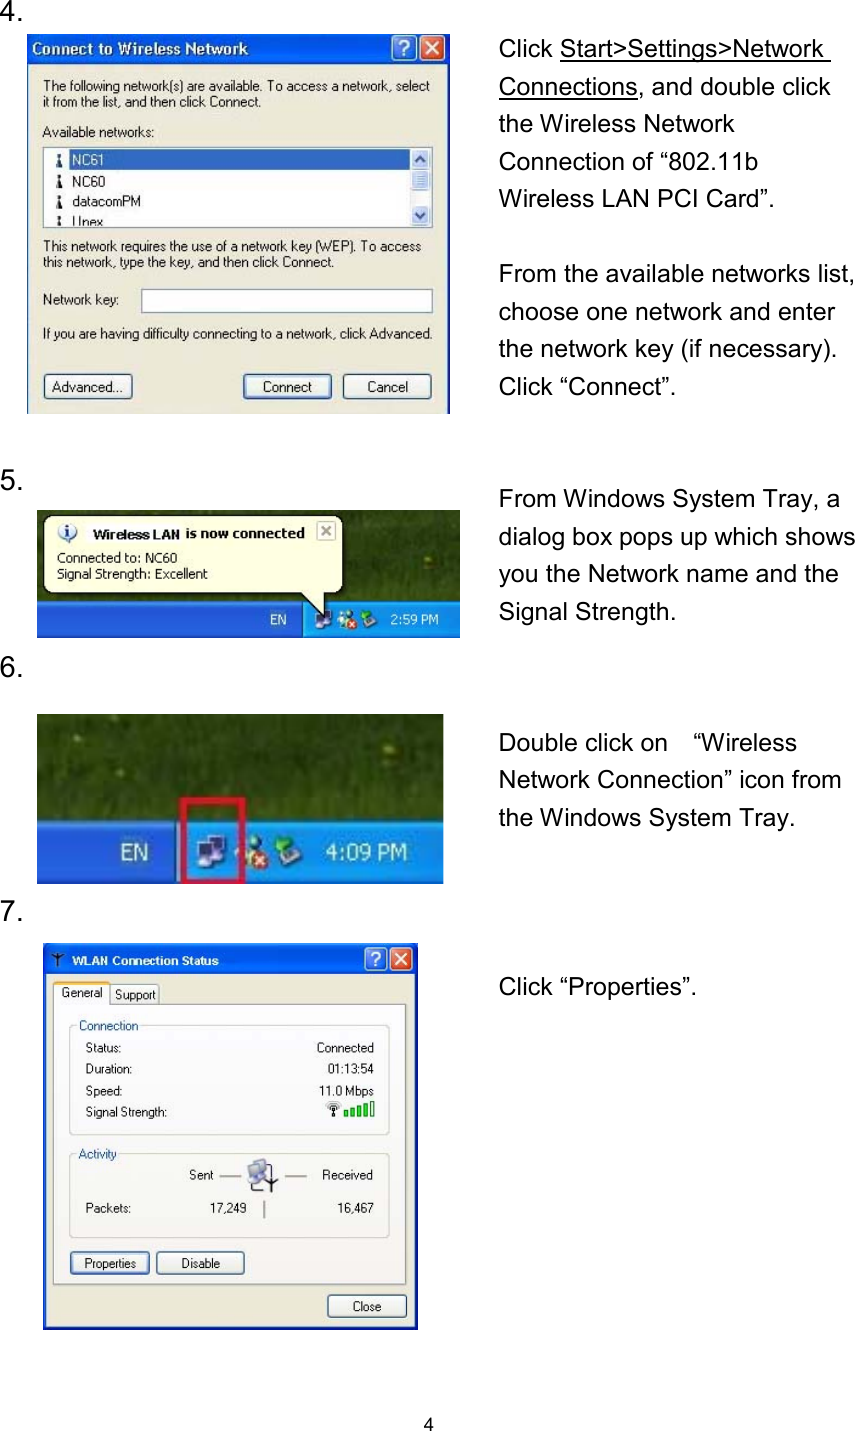  44.  Click Start&gt;Settings&gt;Network Connections, and double click the Wireless Network Connection of “802.11b Wireless LAN PCI Card”. From the available networks list, choose one network and enter the network key (if necessary).   Click “Connect”. 5.   From Windows System Tray, a dialog box pops up which shows you the Network name and the Signal Strength. 6.Double click on    “Wireless Network Connection” icon from the Windows System Tray. 7.     Click “Properties”. 